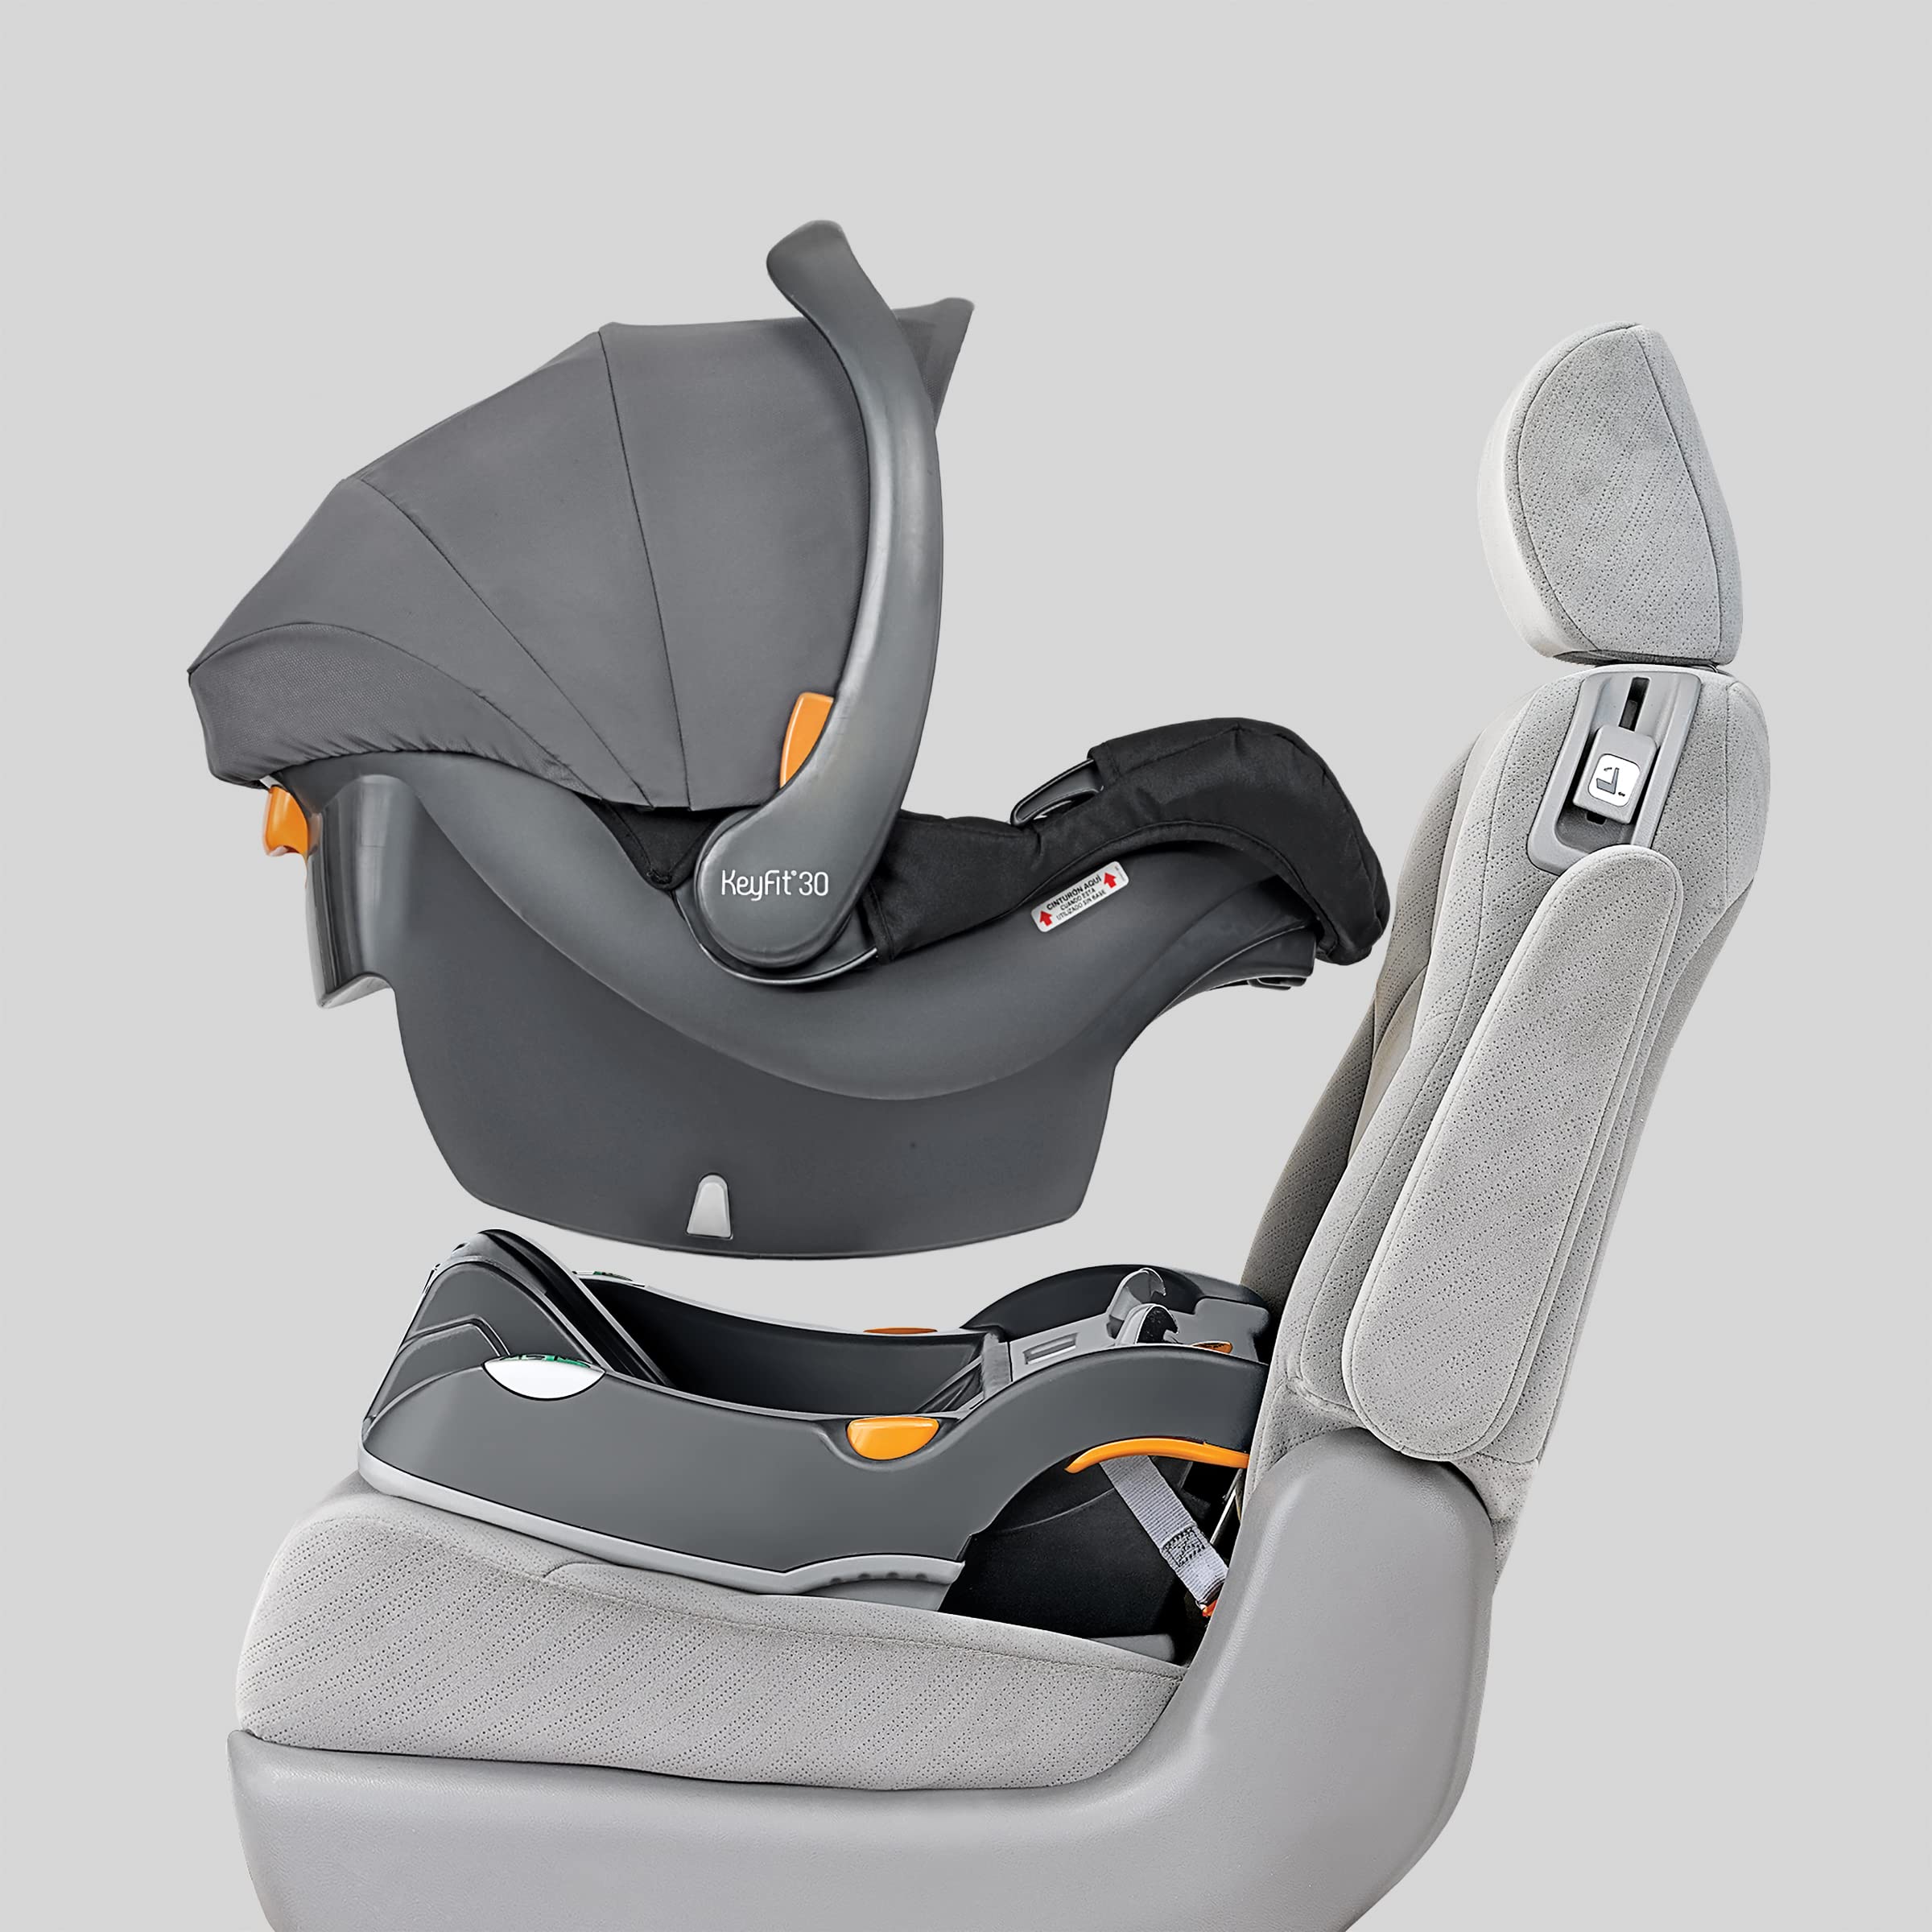 Chicco KeyFit 30 Infant Car Seat and Base | Rear-Facing Seat for Infants 4-30 lbs.| Infant Head and Body Support | Compatible with Chicco Strollers | Baby Travel Gear